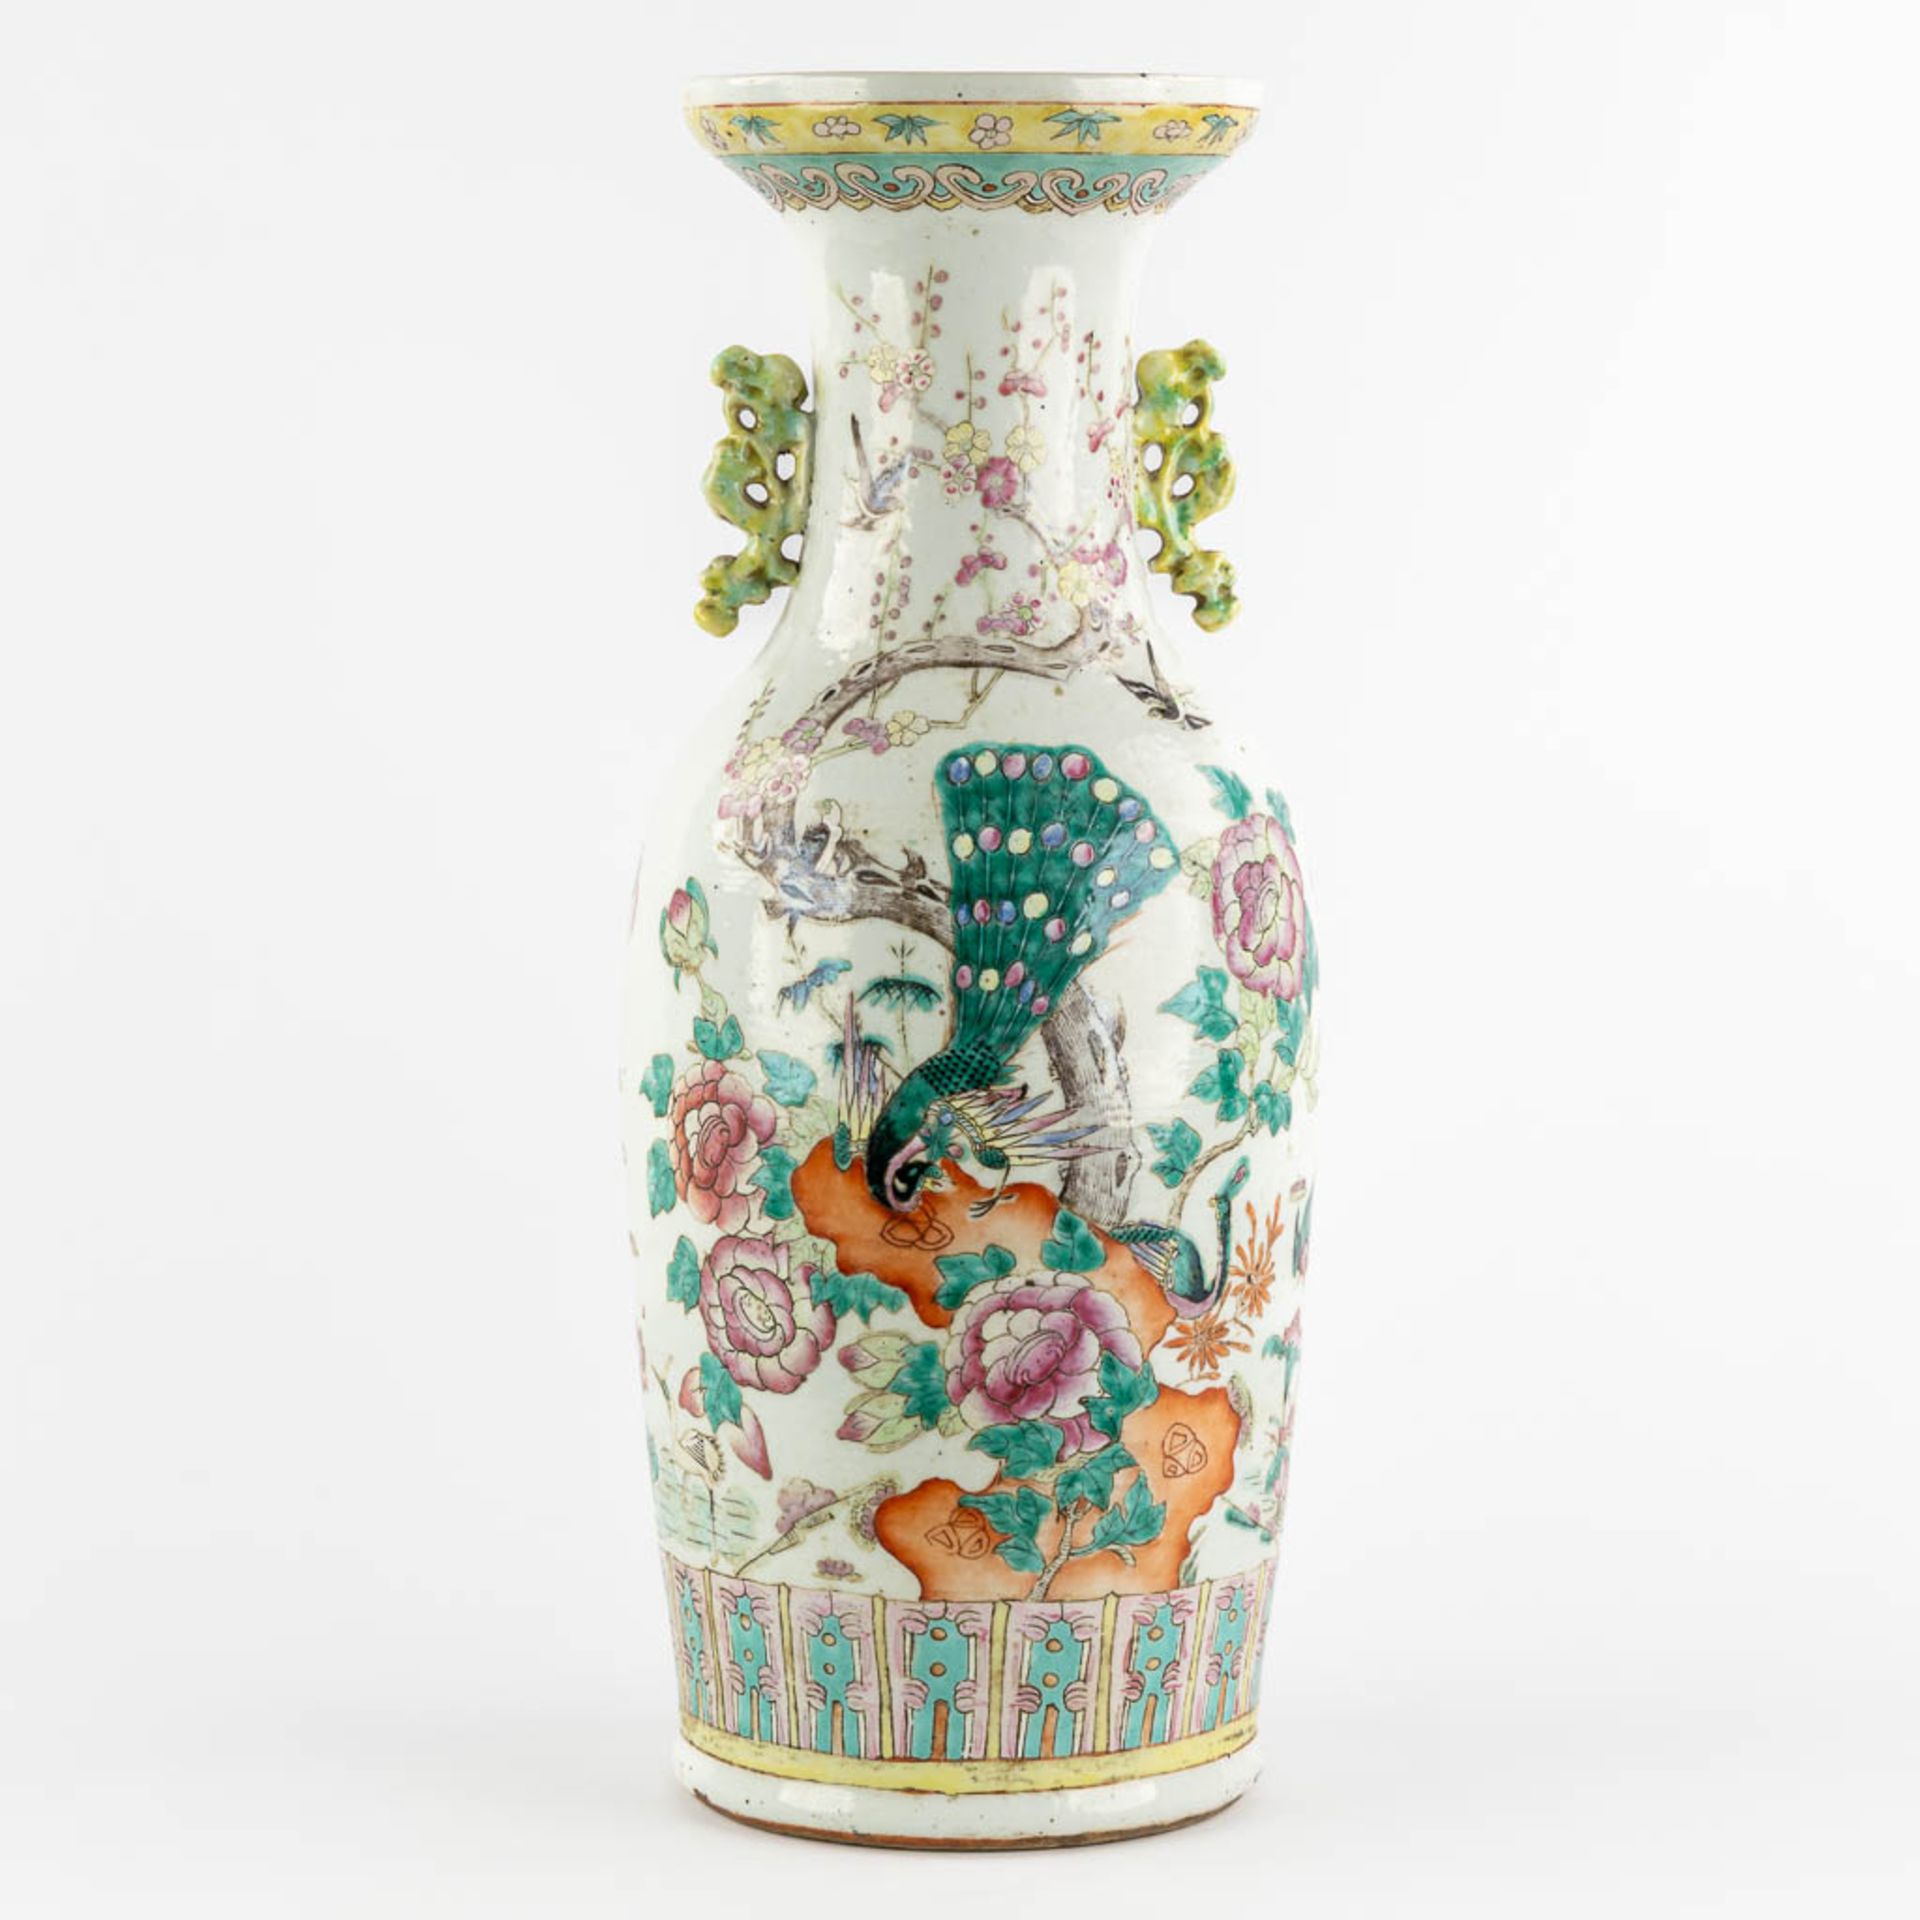 A Chinese Vase, Famille Rose decorated with Fauna and Flora. (H:60 x D:25 cm) - Image 5 of 12